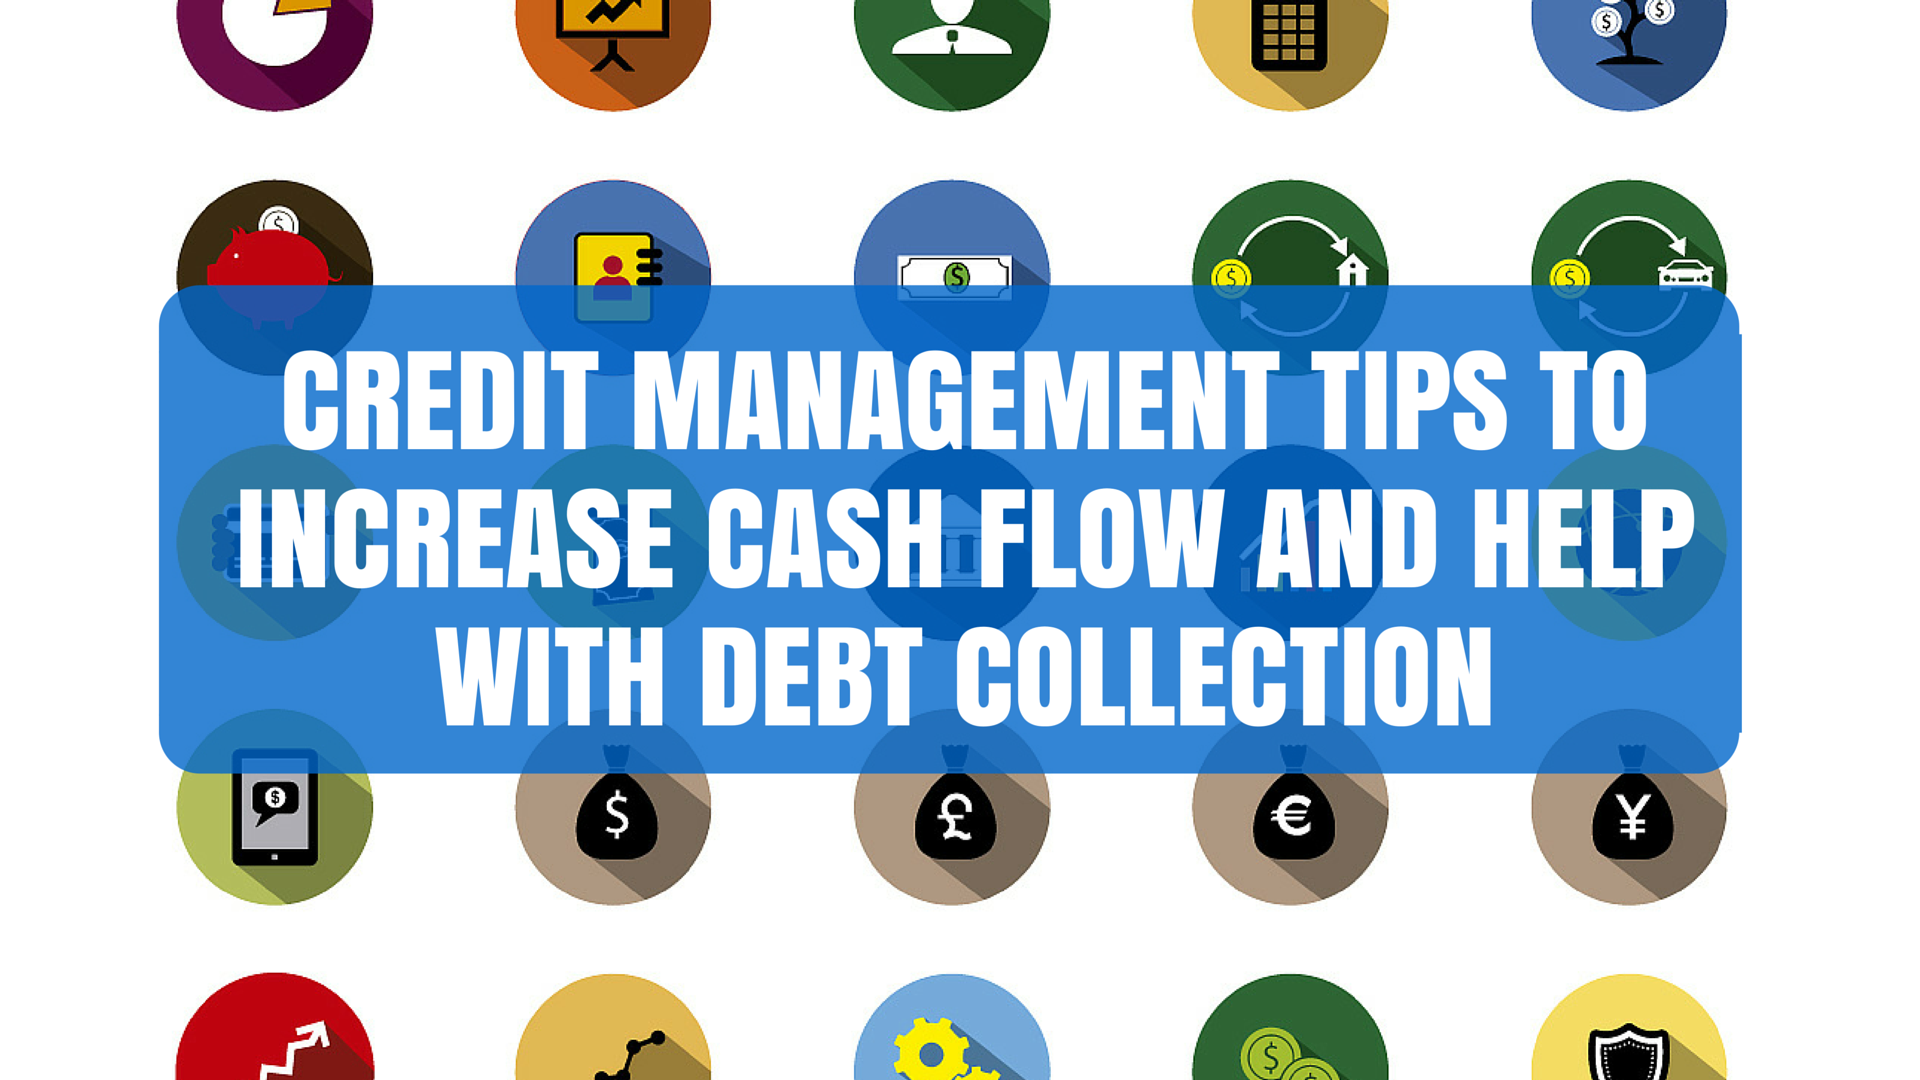 DRA blogpost_Credit Management Tips to Increase Cash Flow and Help with Debt Collection_18 Feb 2016